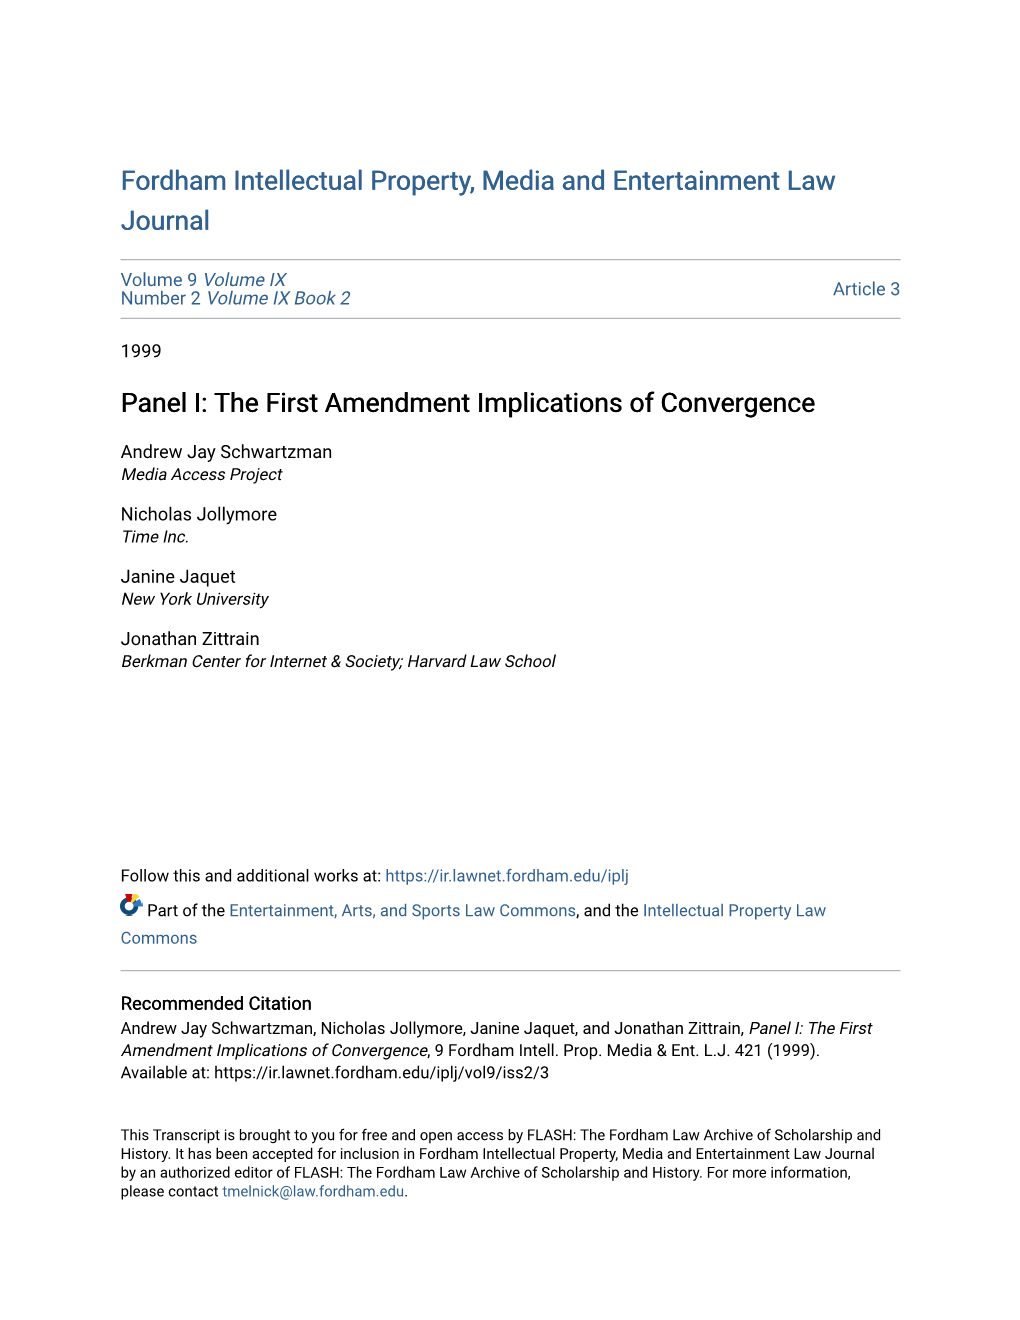 The First Amendment Implications of Convergence